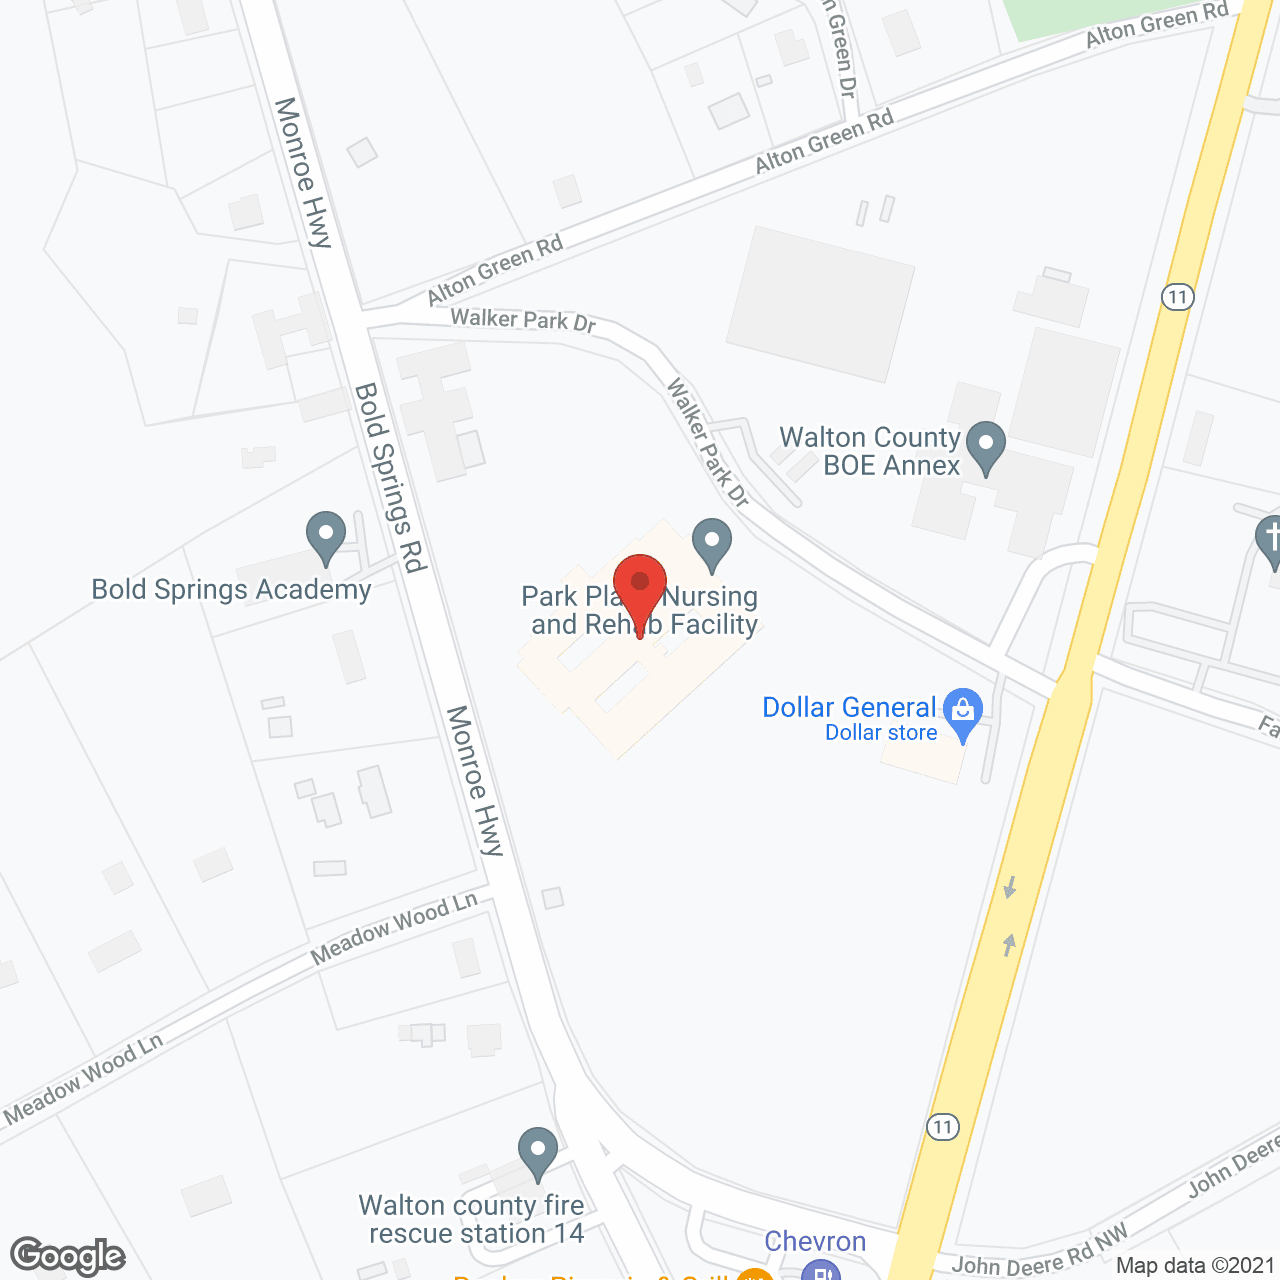 Park Place Nursing Facility in google map